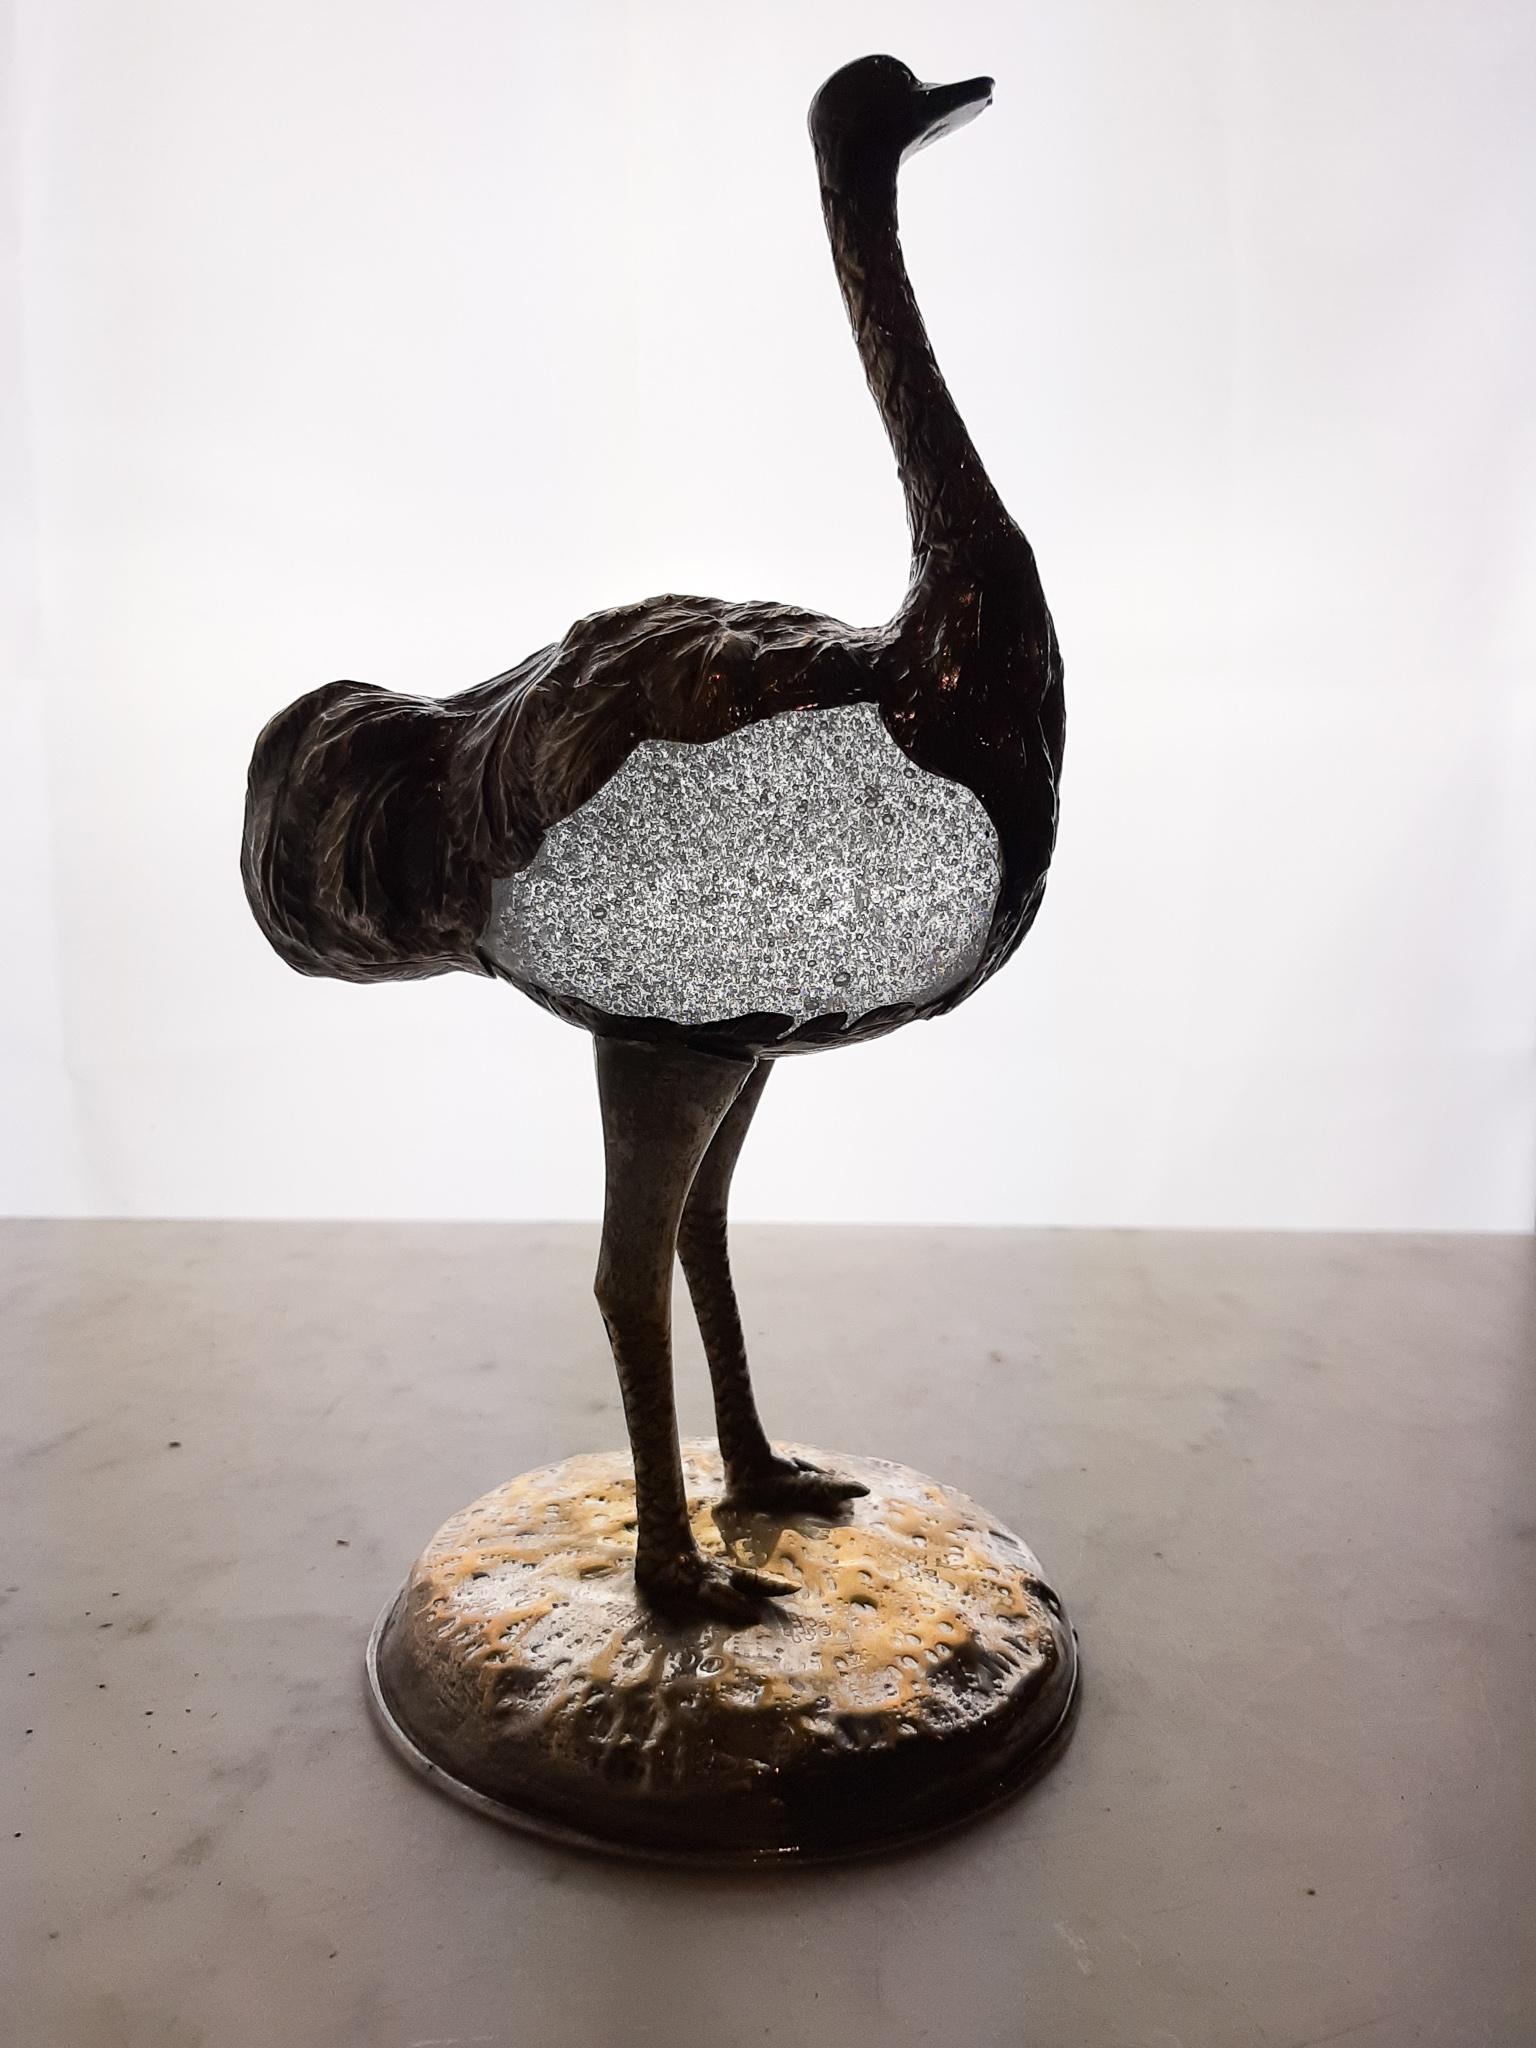 Hollywood Regency Gabriella Crespi Ostrich Sculpture with a Murano Glass Egg, Italy, 1970s 